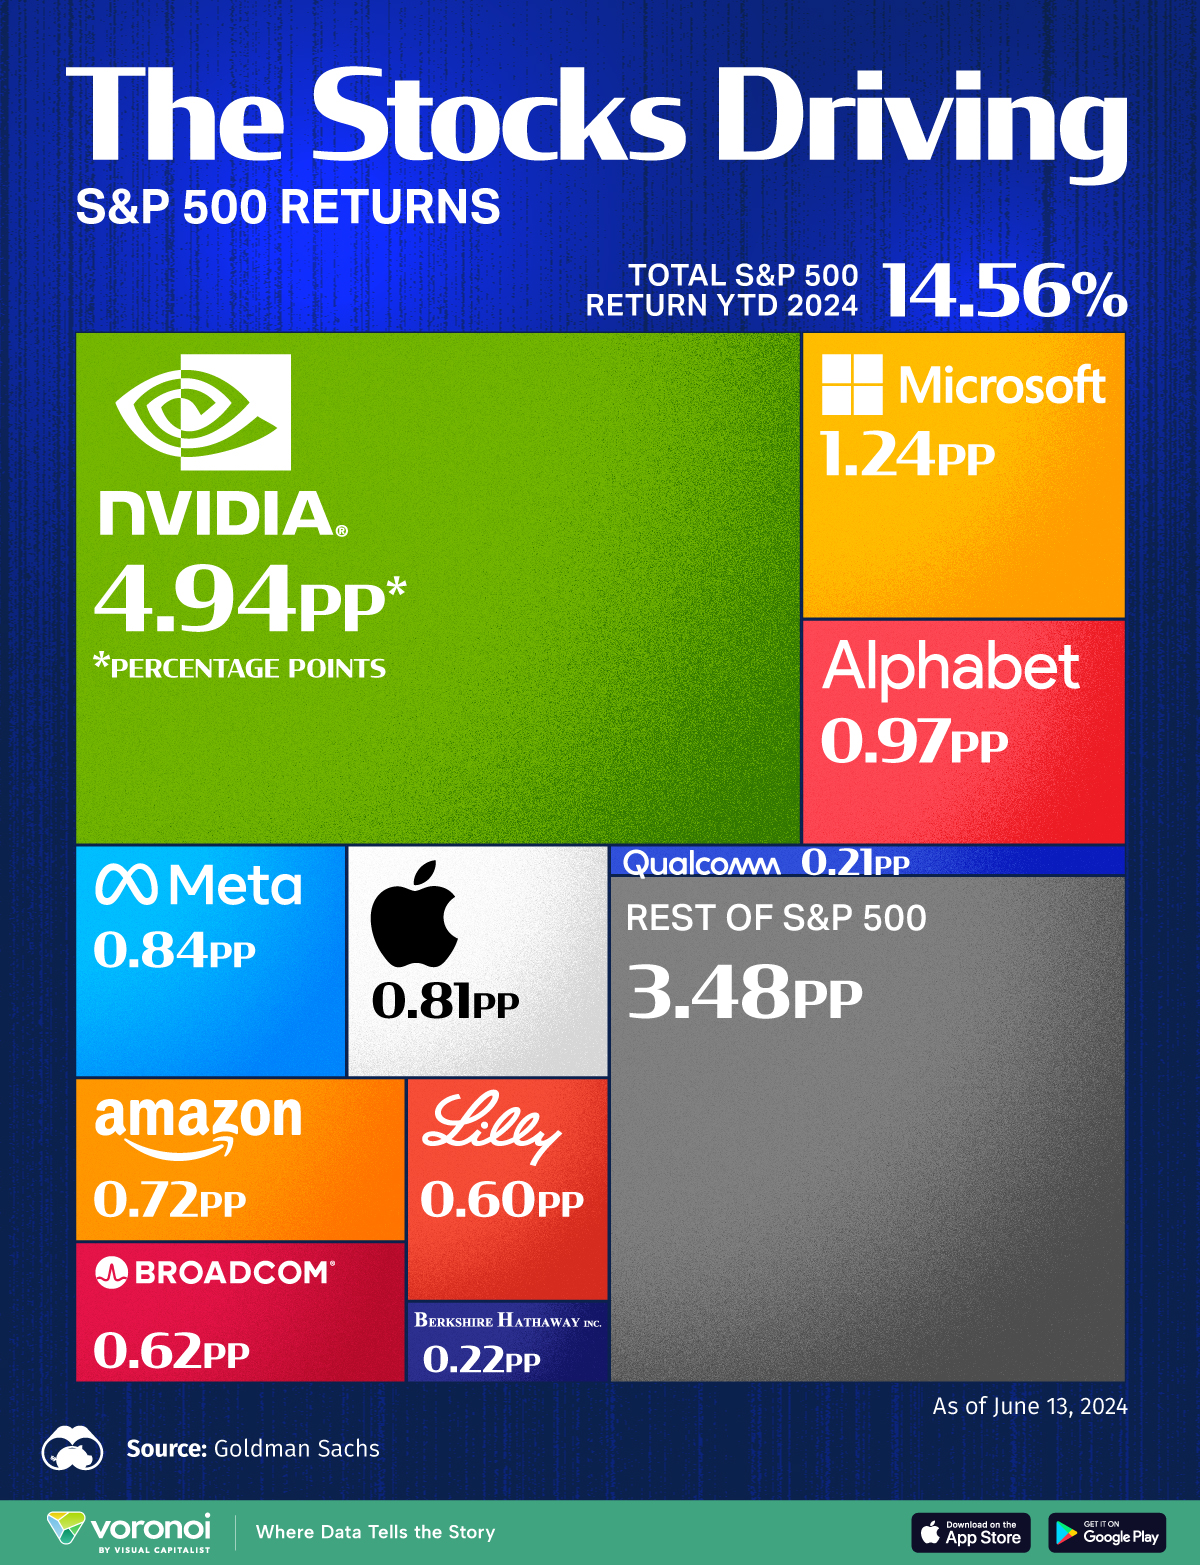 This tree map shows the top 10 S&P 500 stocks driving returns in 2024.